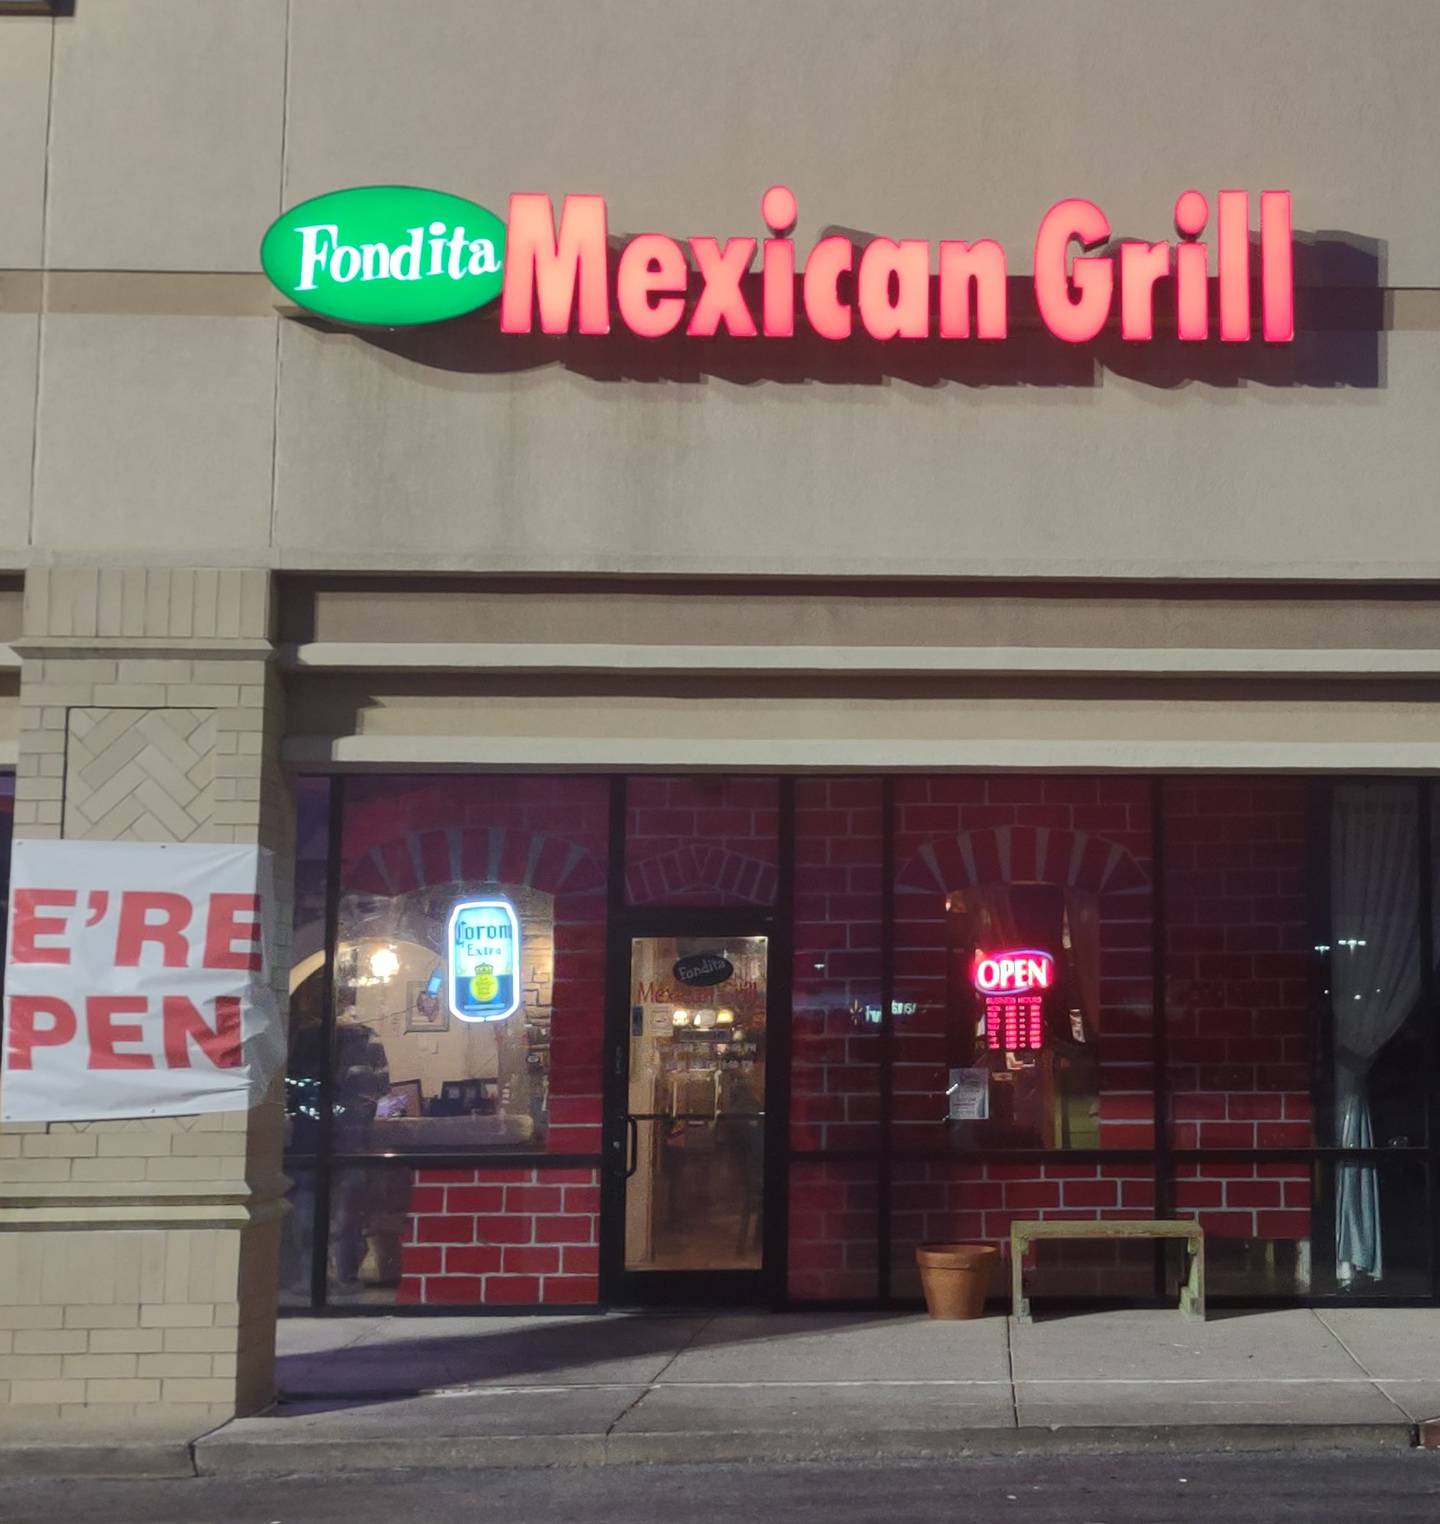 La Fondita Mexican Grill is located at 351 Stevenson Road in Ottawa, in the shopping center across from the Walmart.